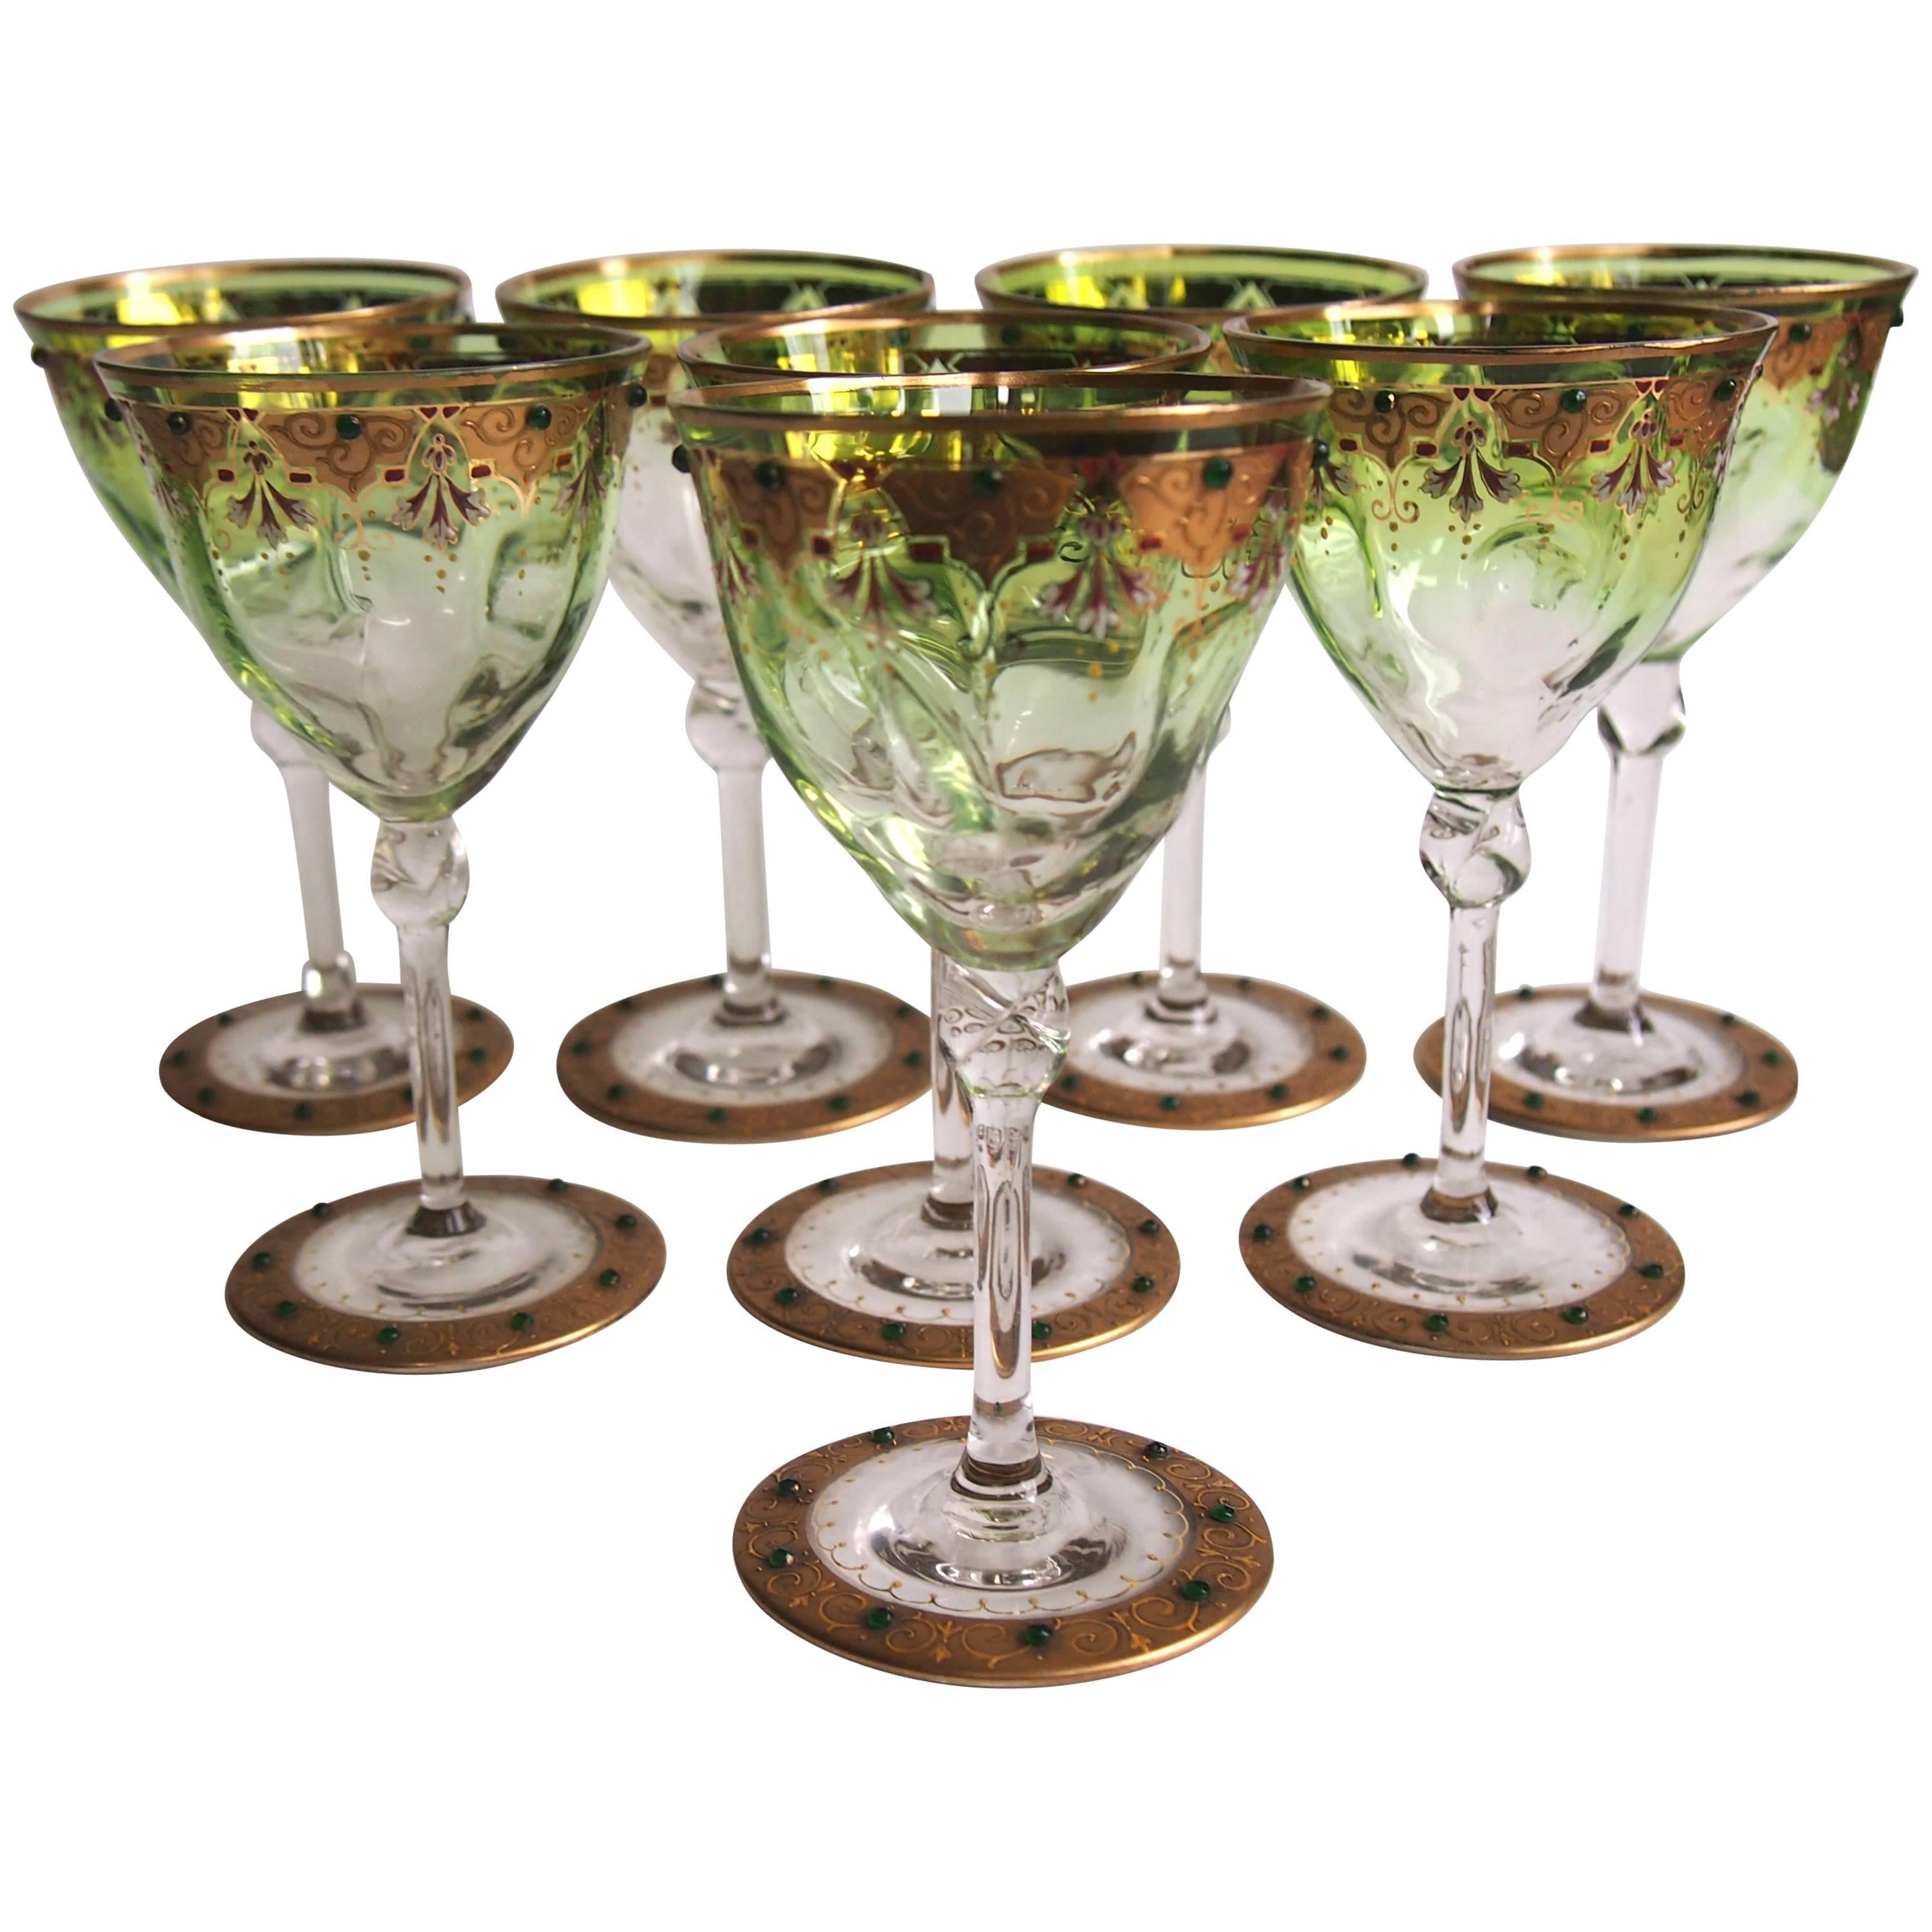 Moser Set of Eight Art Nouveau Green to Clear Enamel and Gilded Wine Glasses